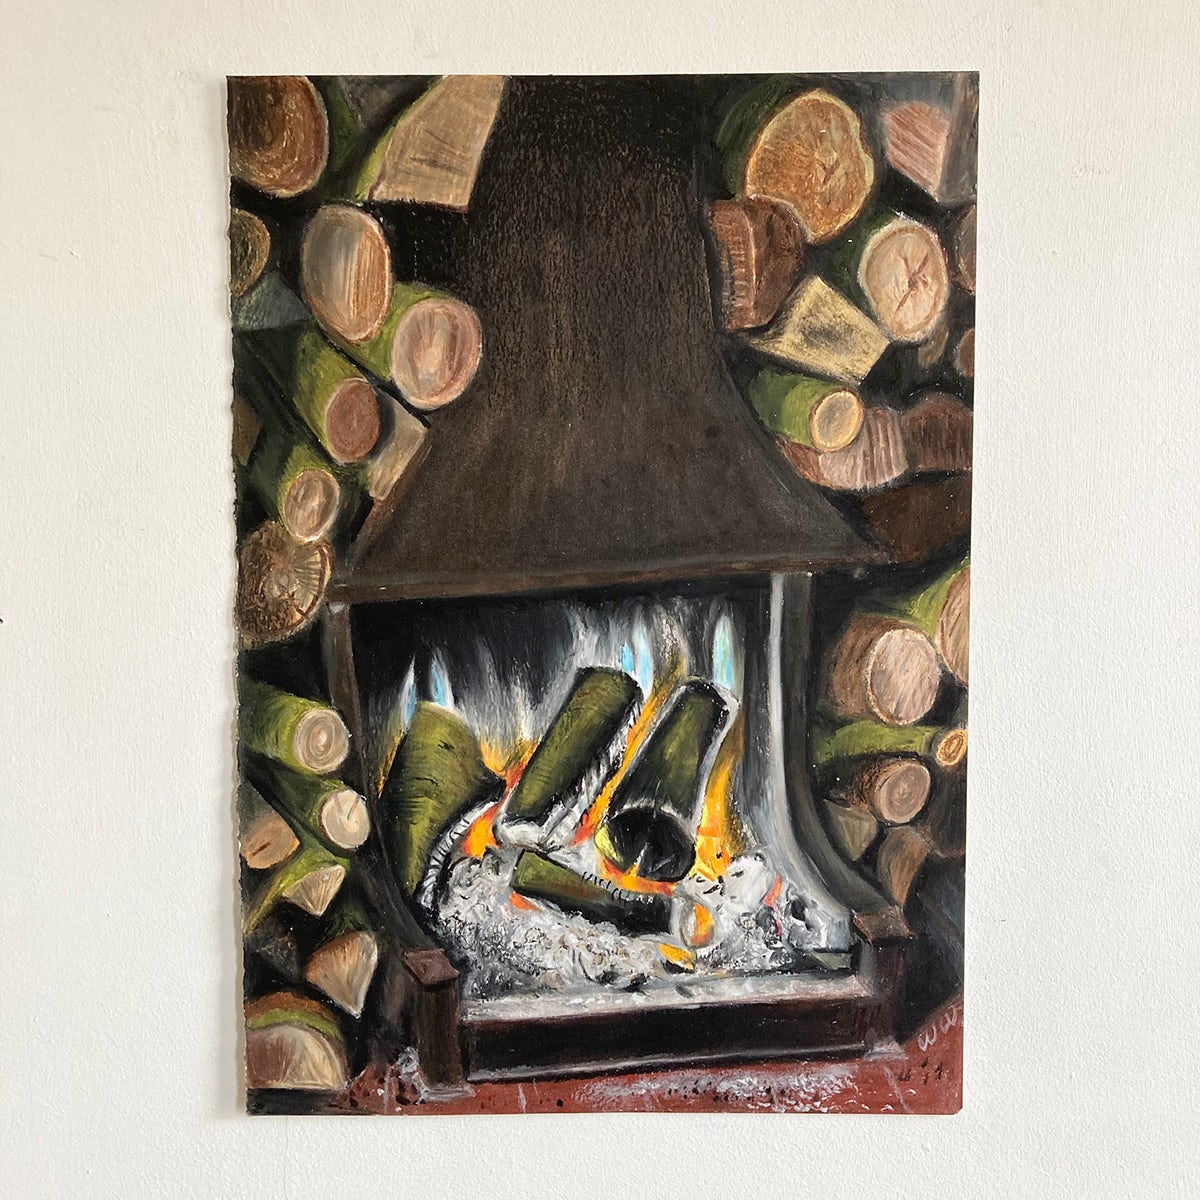 Image shows a drawing by Wilfrid Wood of a fireplace filled with flames and wood, surrounded by piles of logs